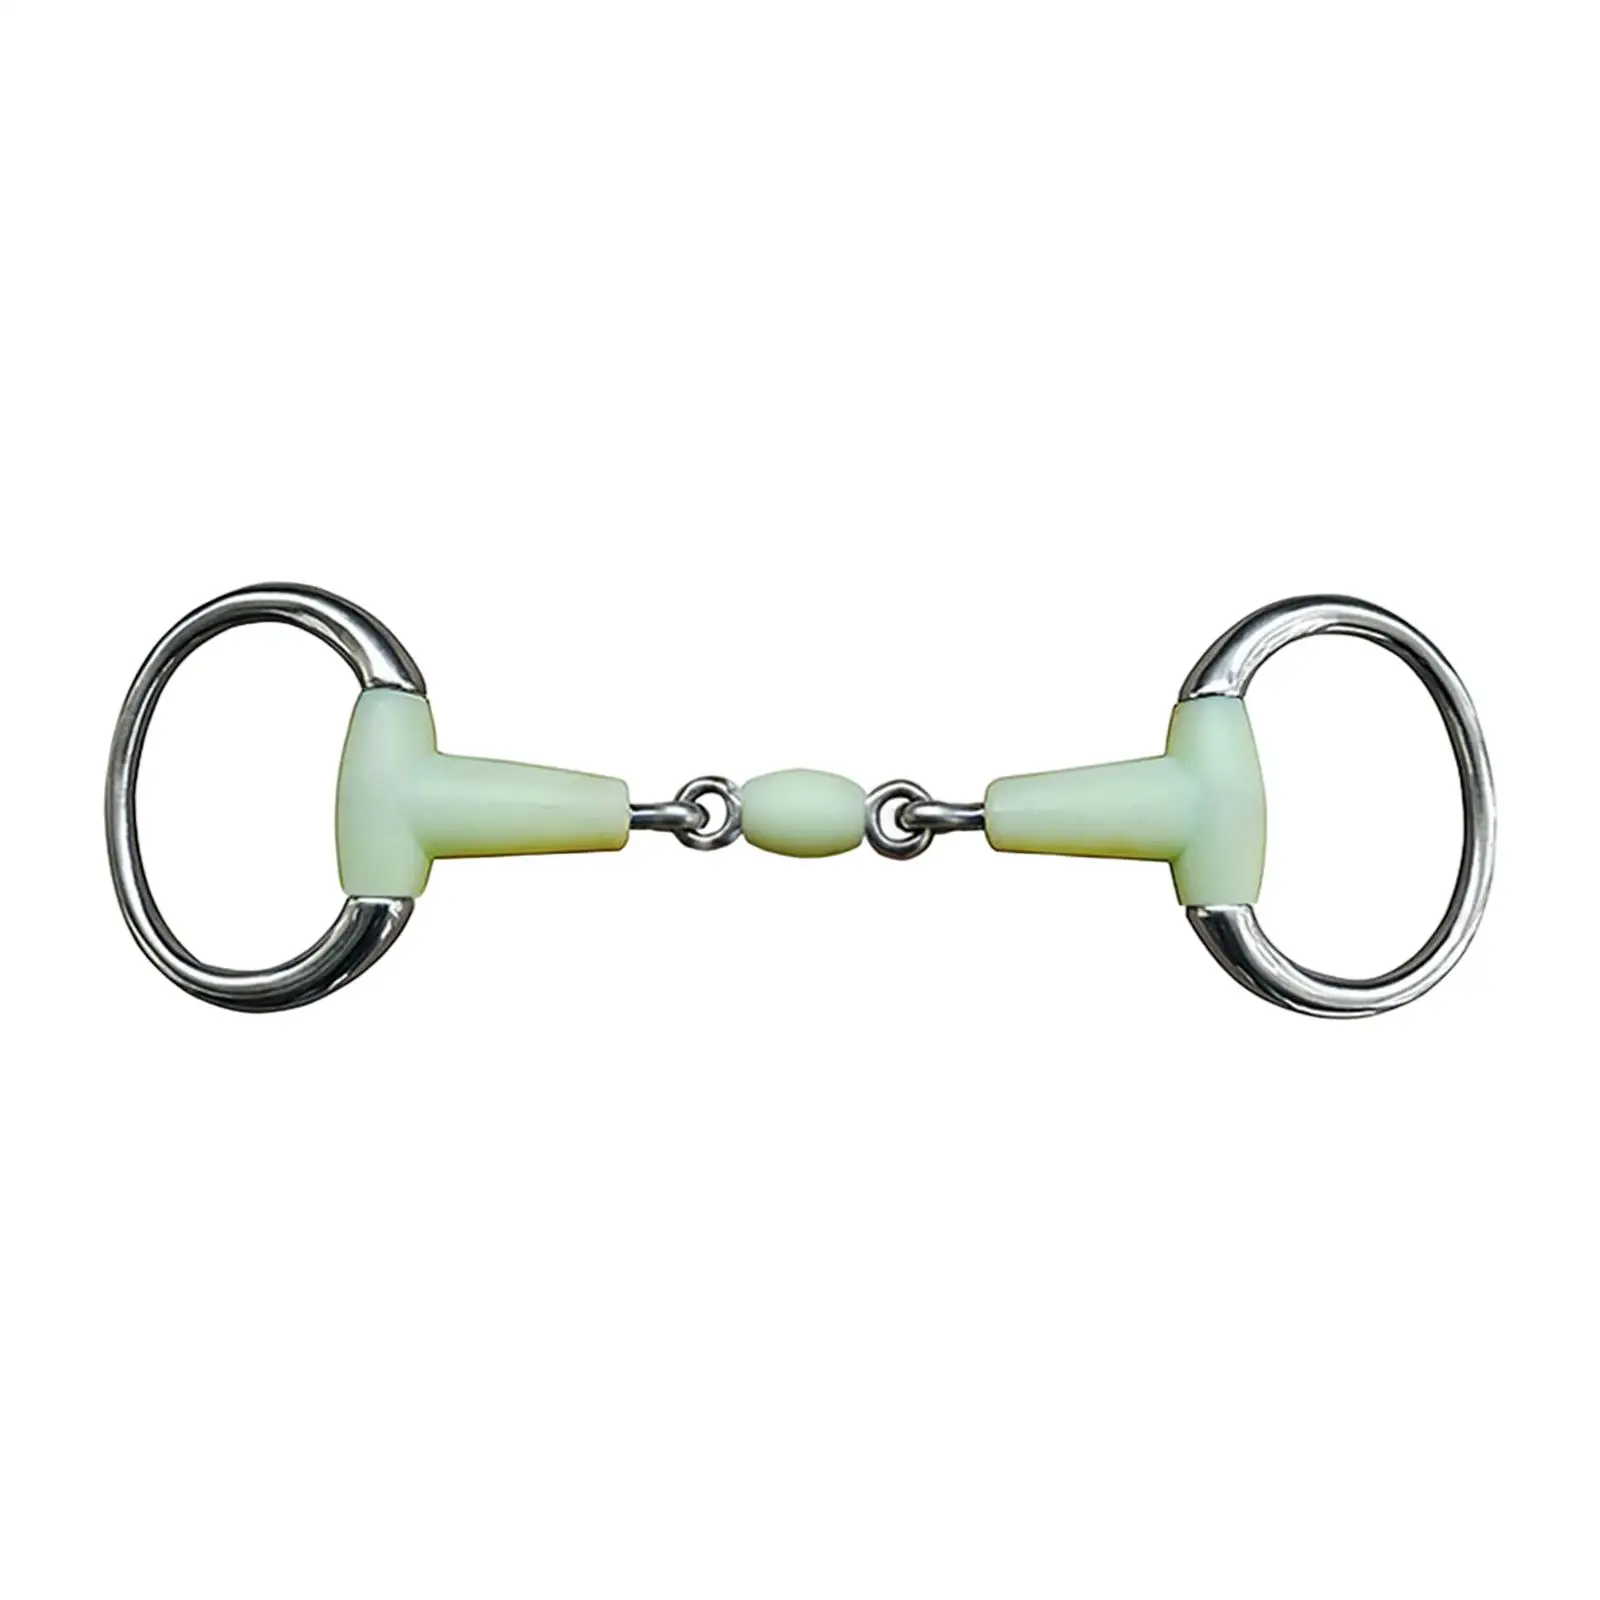 Horse Ring Bit Horse Training Stainless Steel for Horse Riding